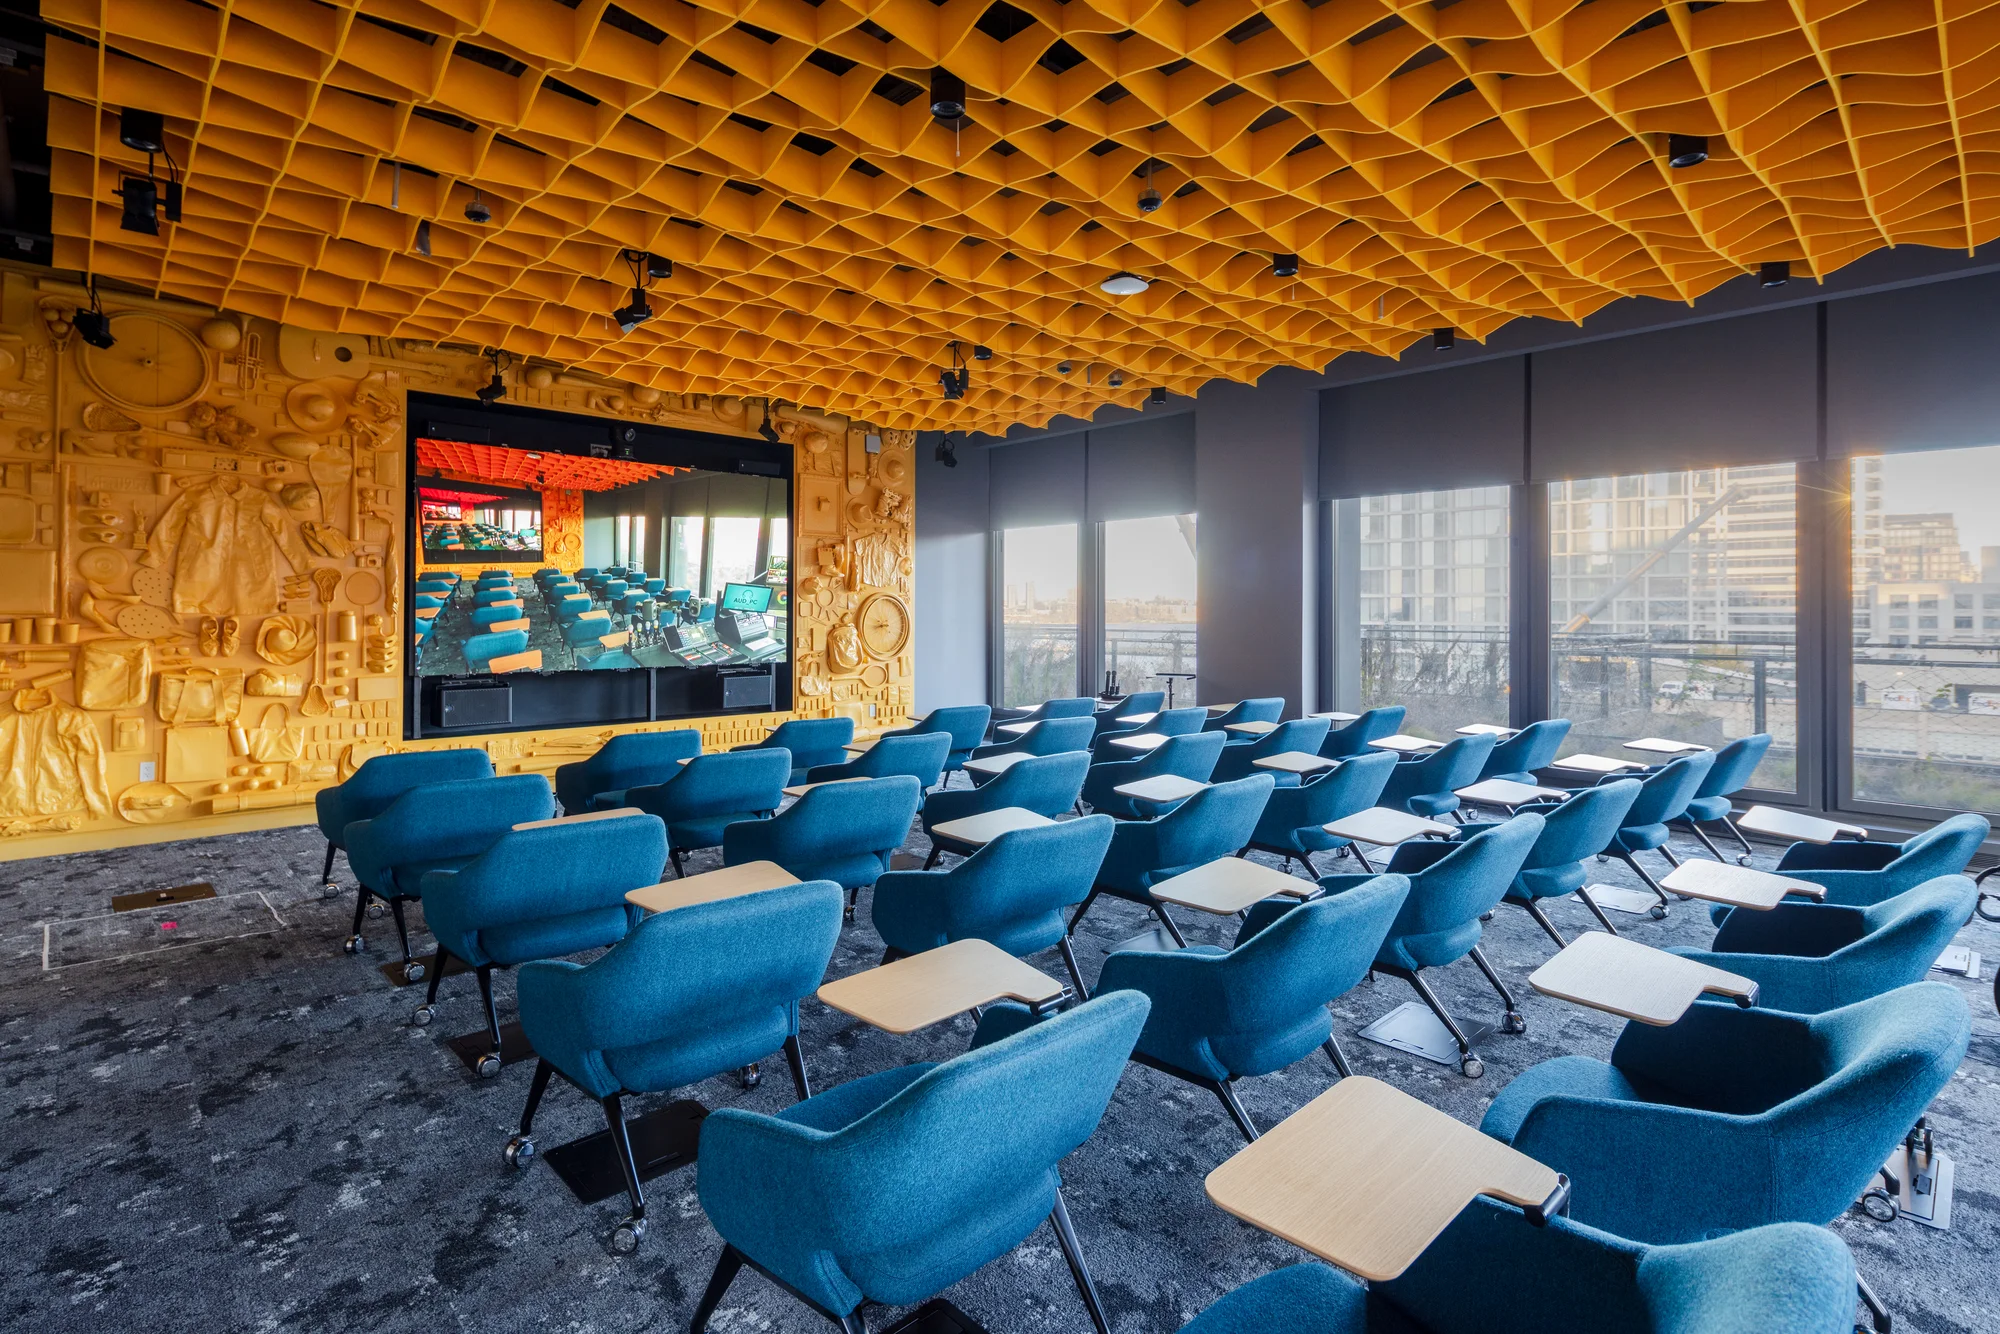 A conference room with classroom style seating, blue chairs and bright yellow walls and ceiling.